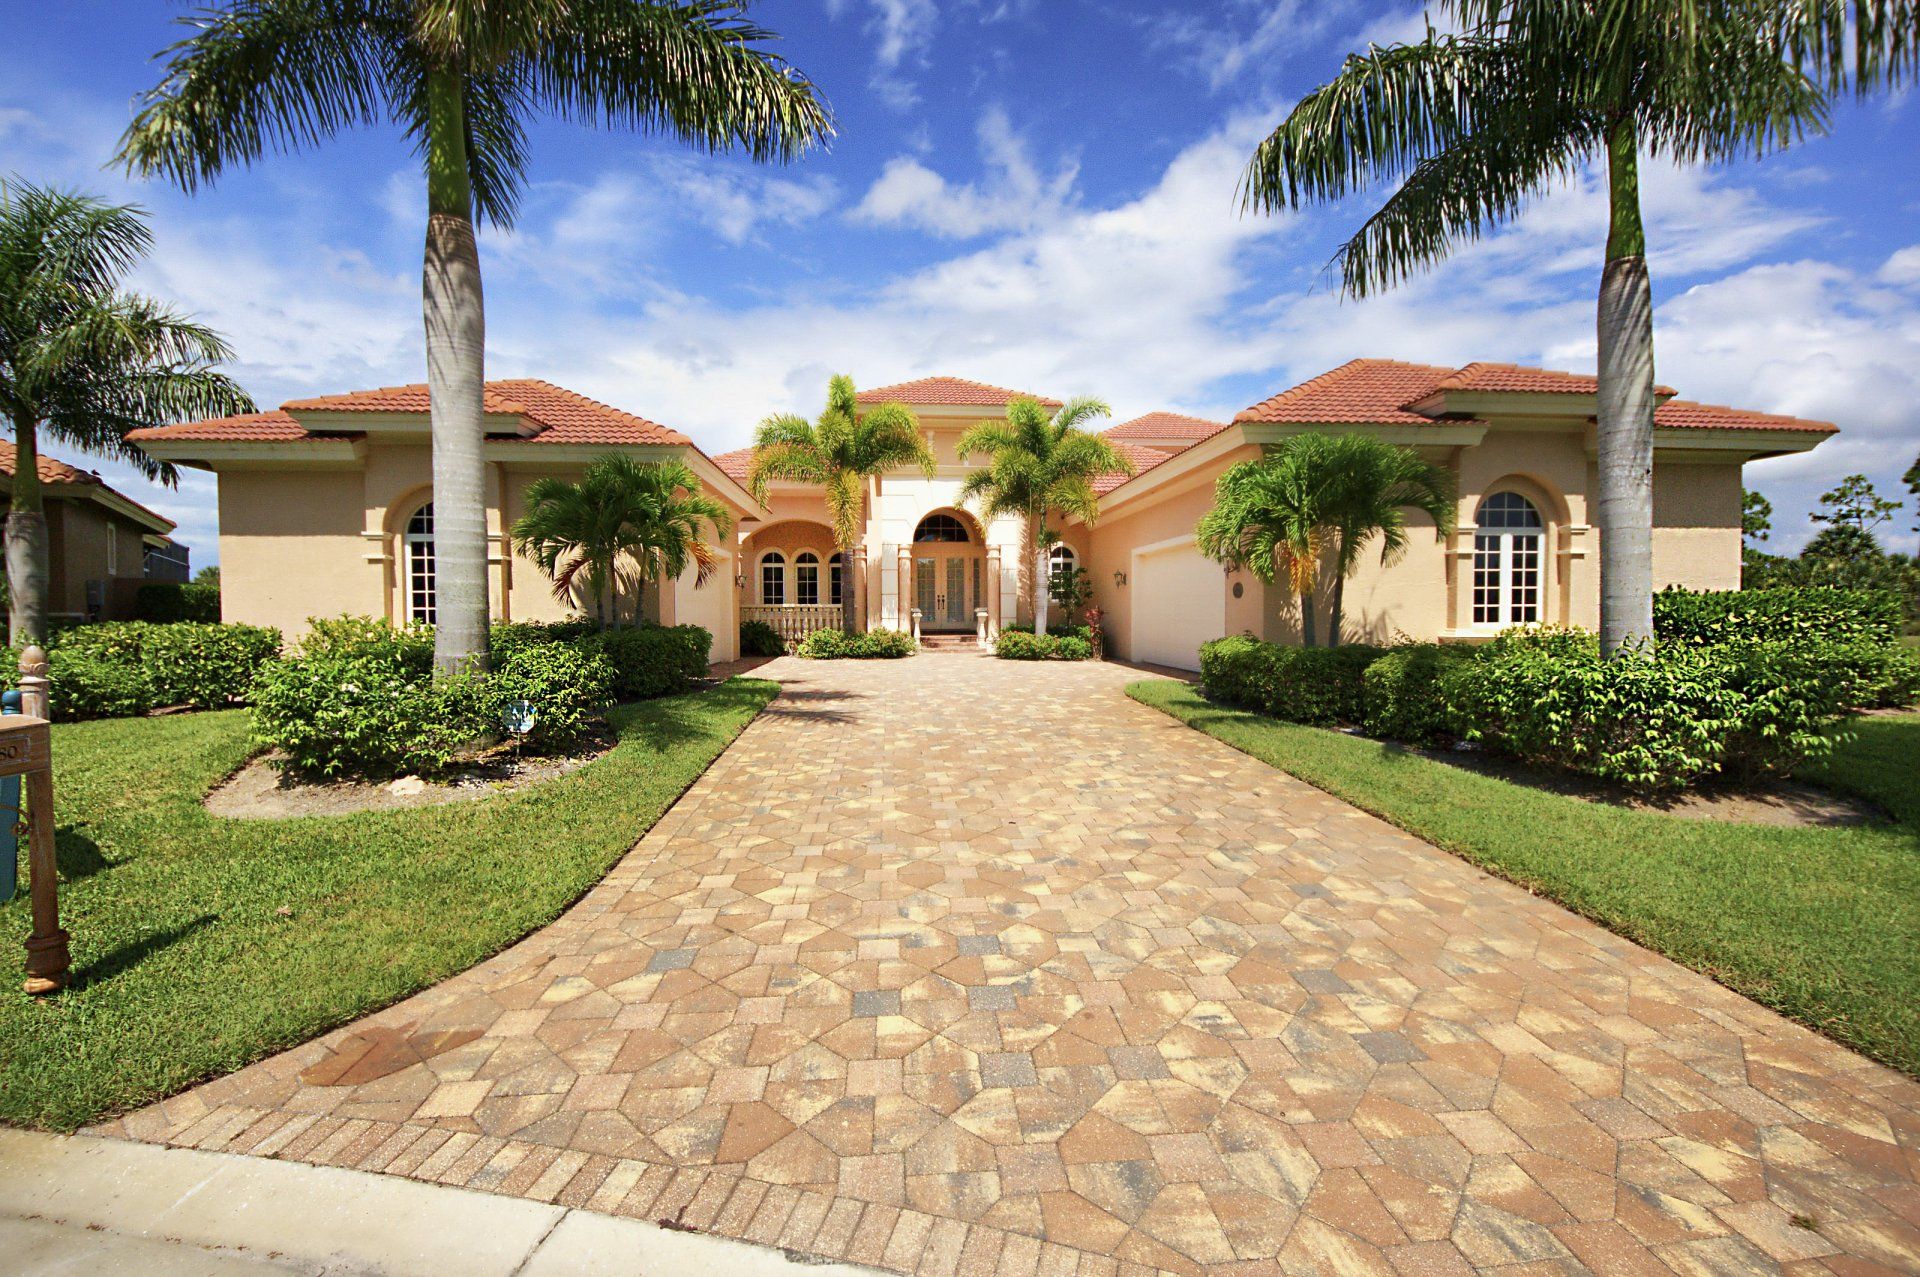 Luxury home with a beautifully paved driveway